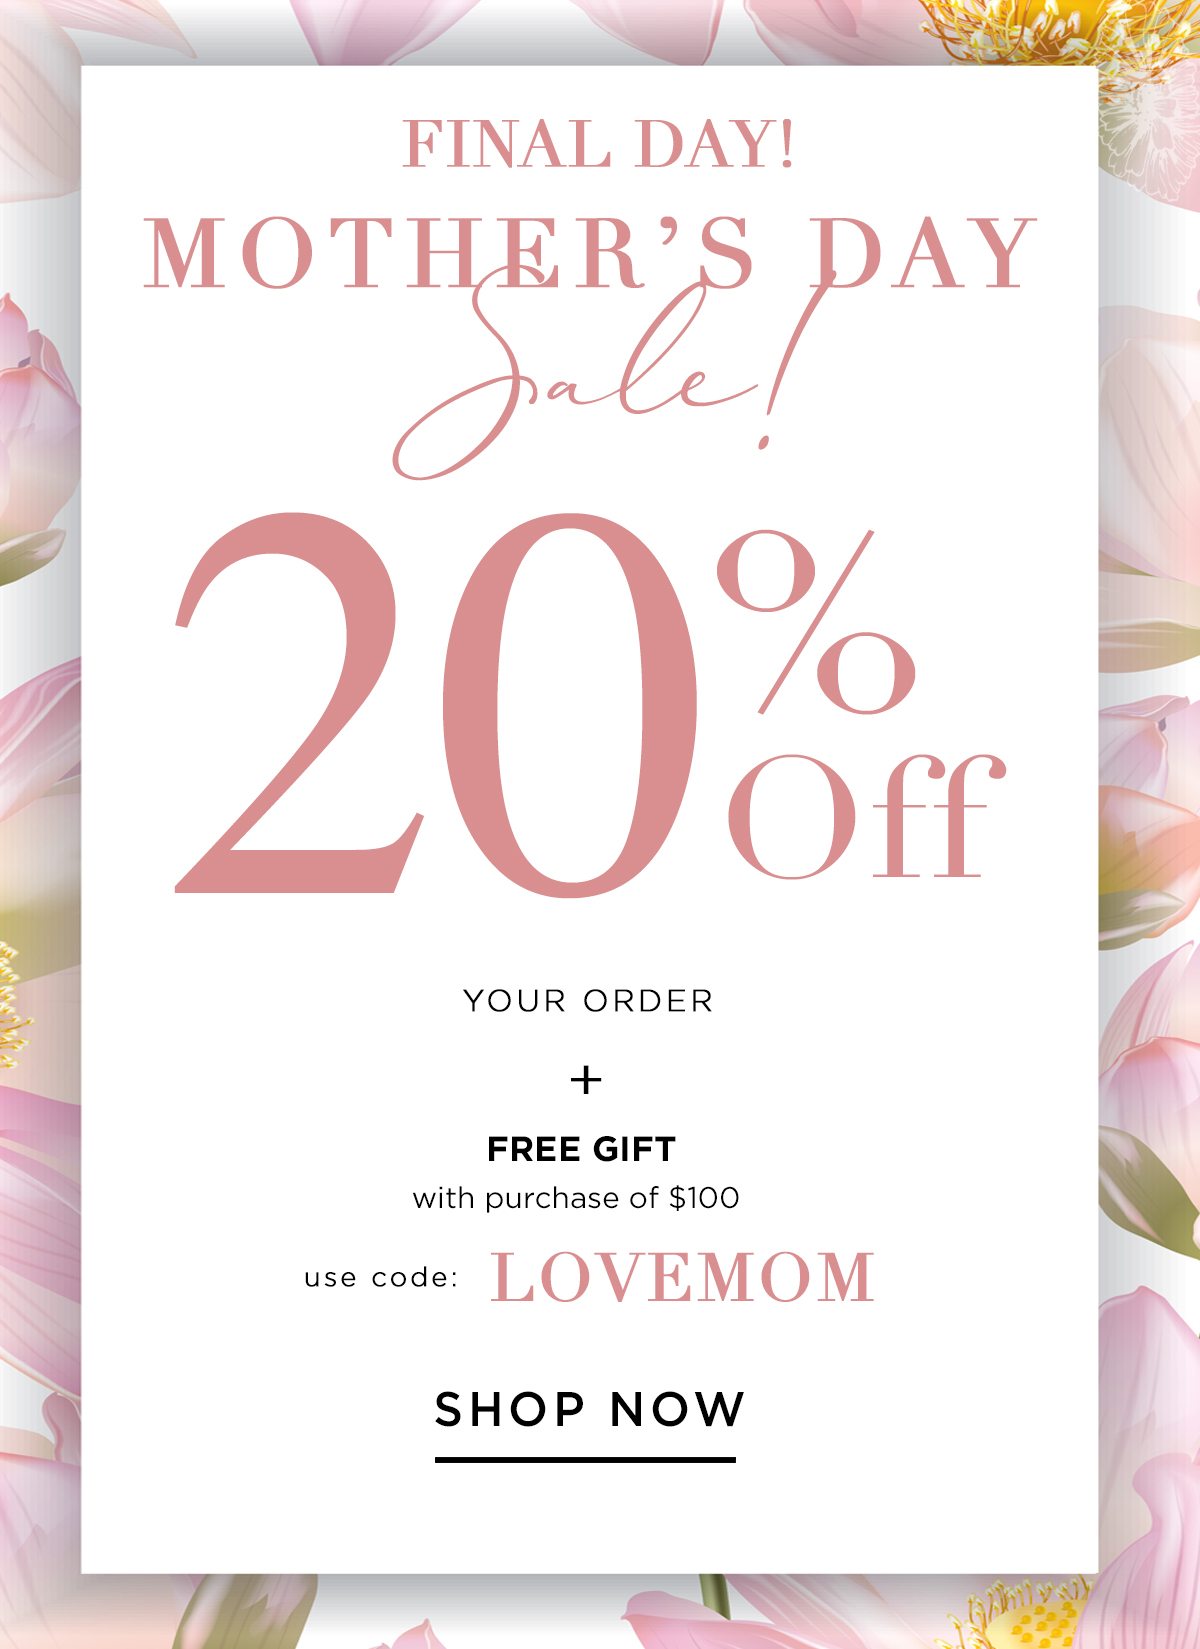 Final Day! Mother's Day Sale! 20% Off Your Order + Free Gift With Purchase Of $100 Use Code: LoveMom - Show Now